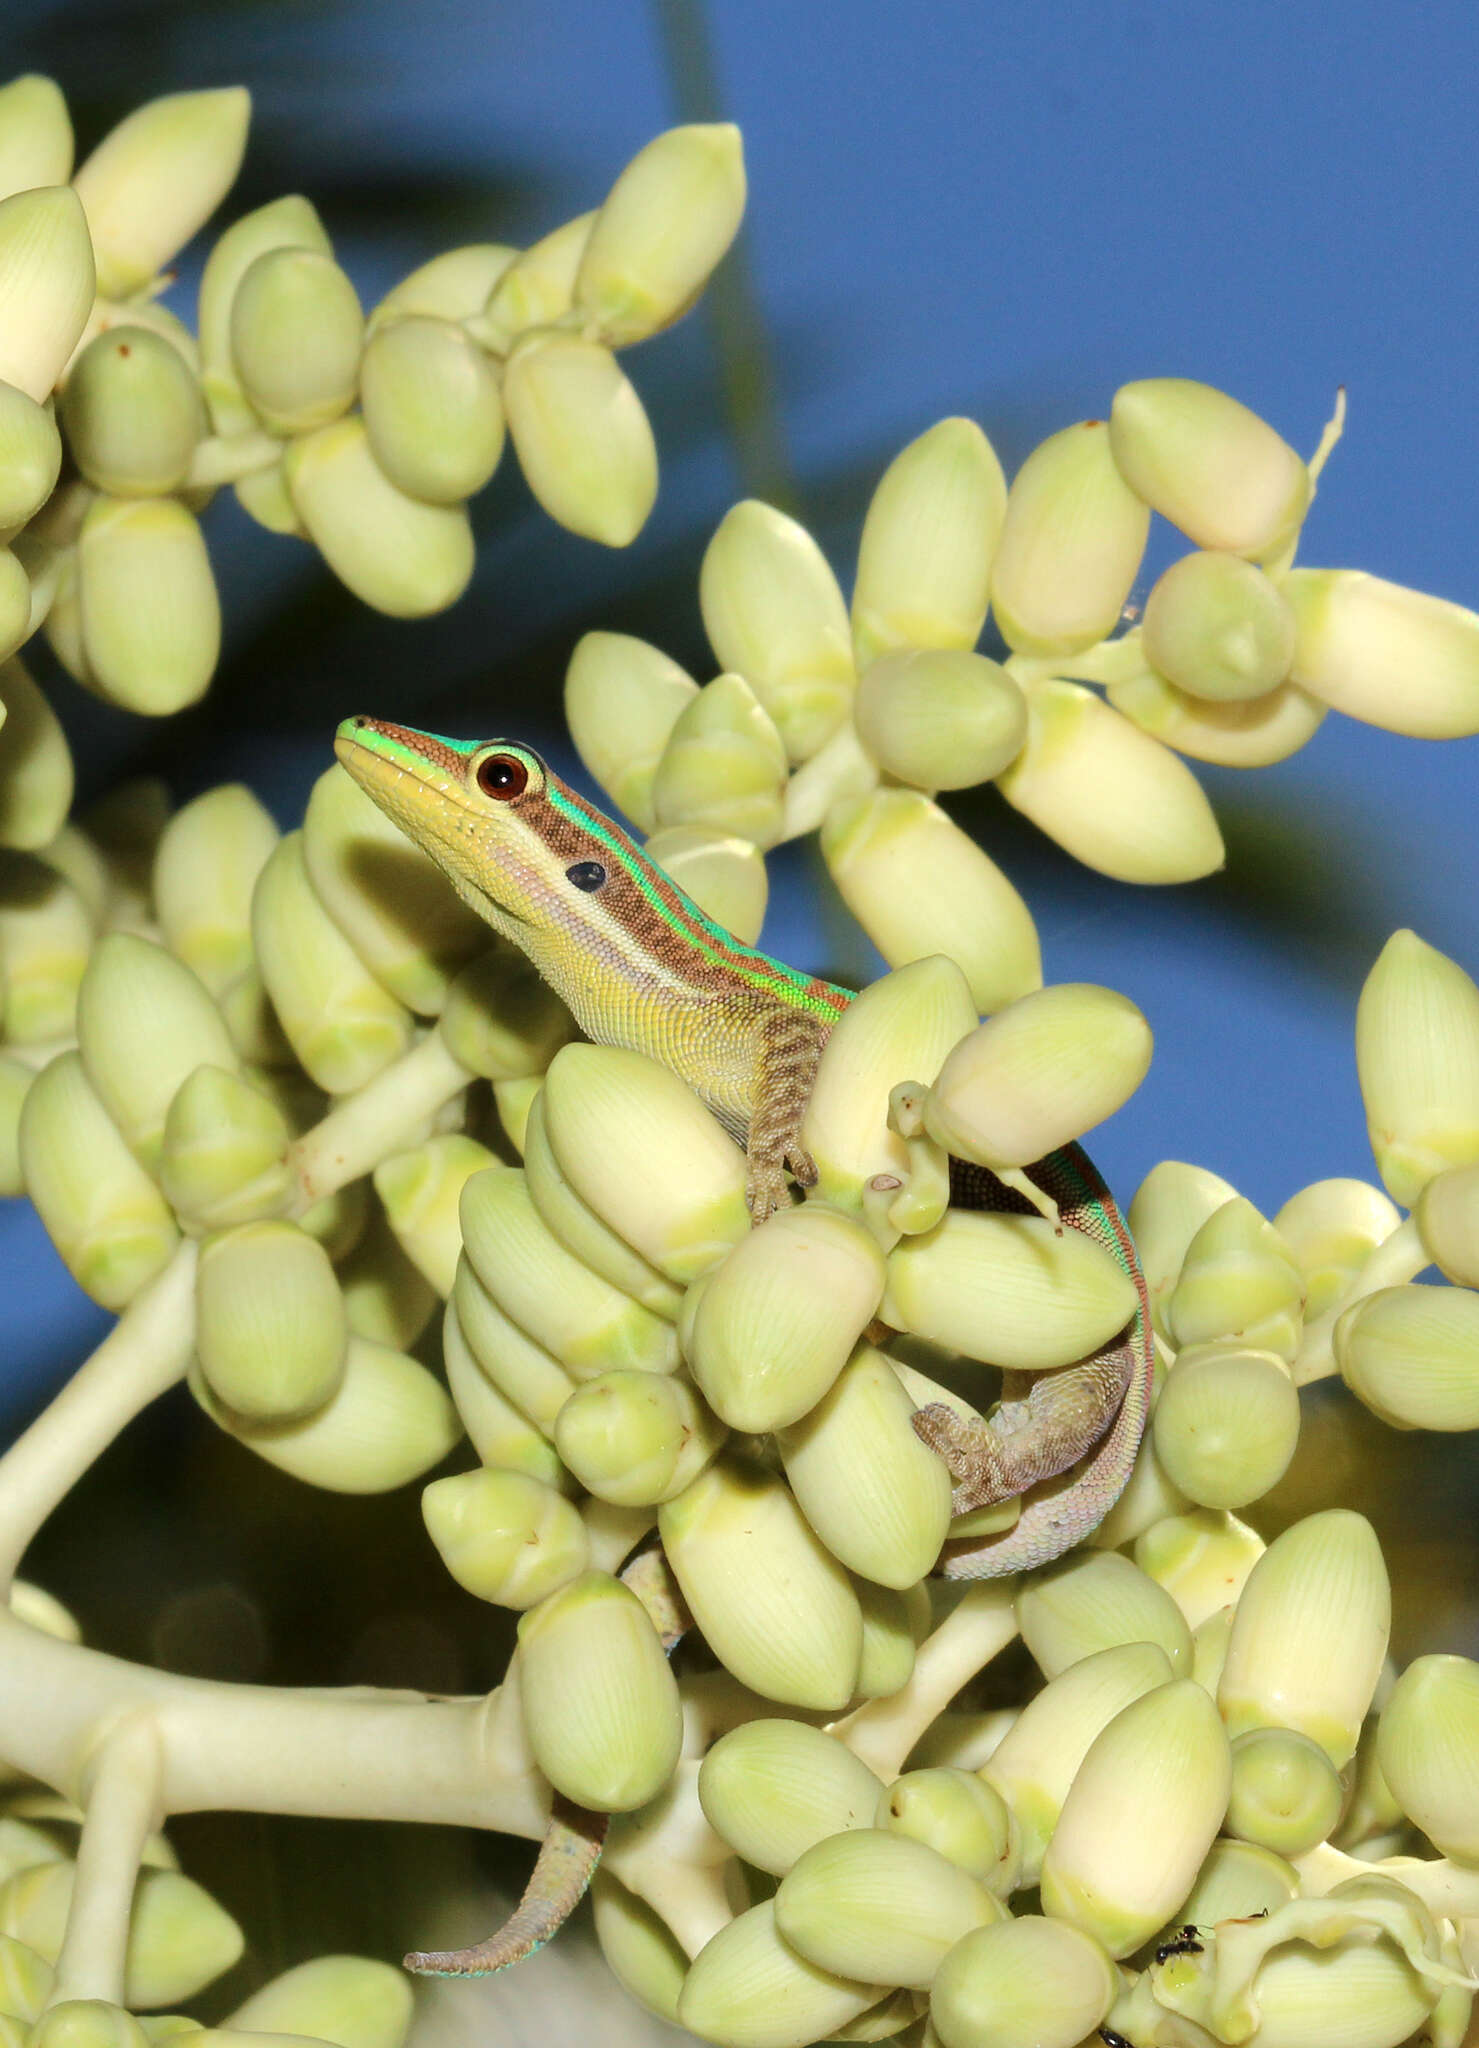 Image of Bluetail Day Gecko